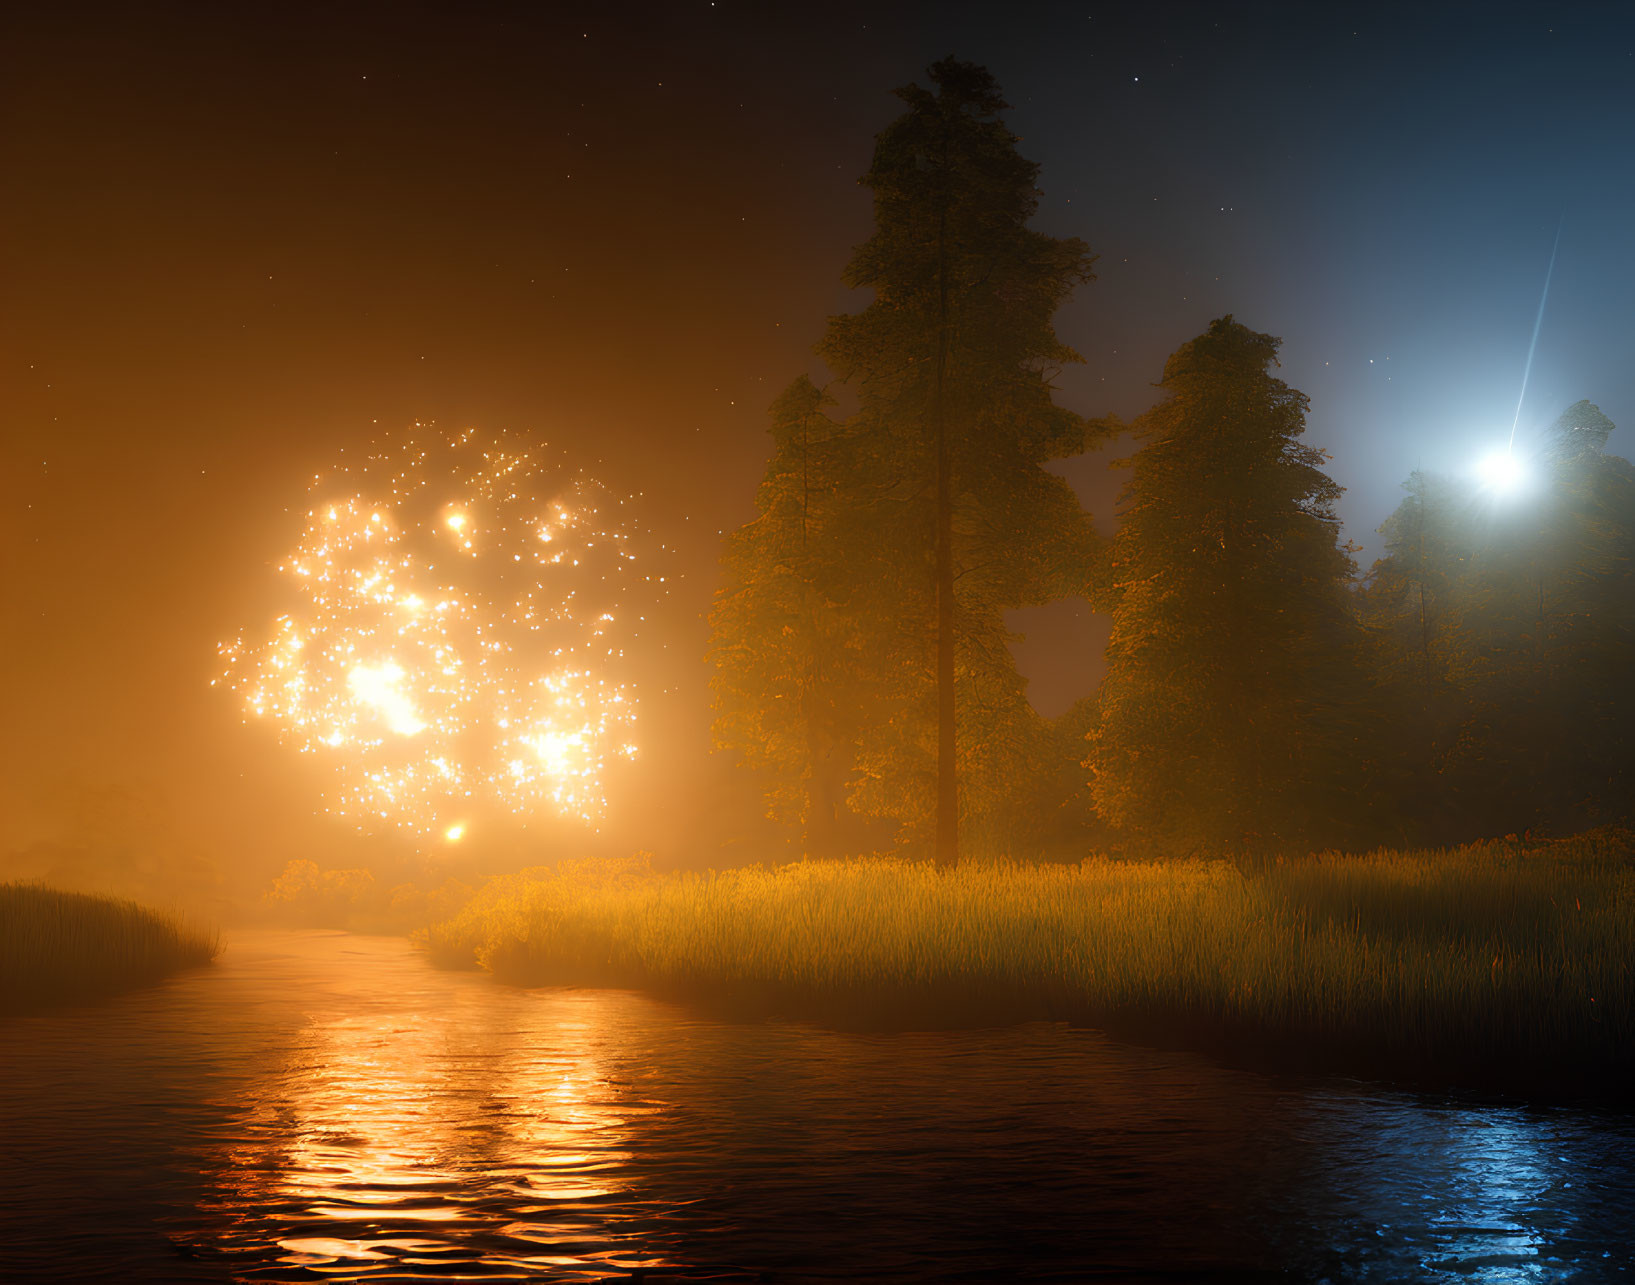 Night landscape with meteor, forest, river, and orange explosion.